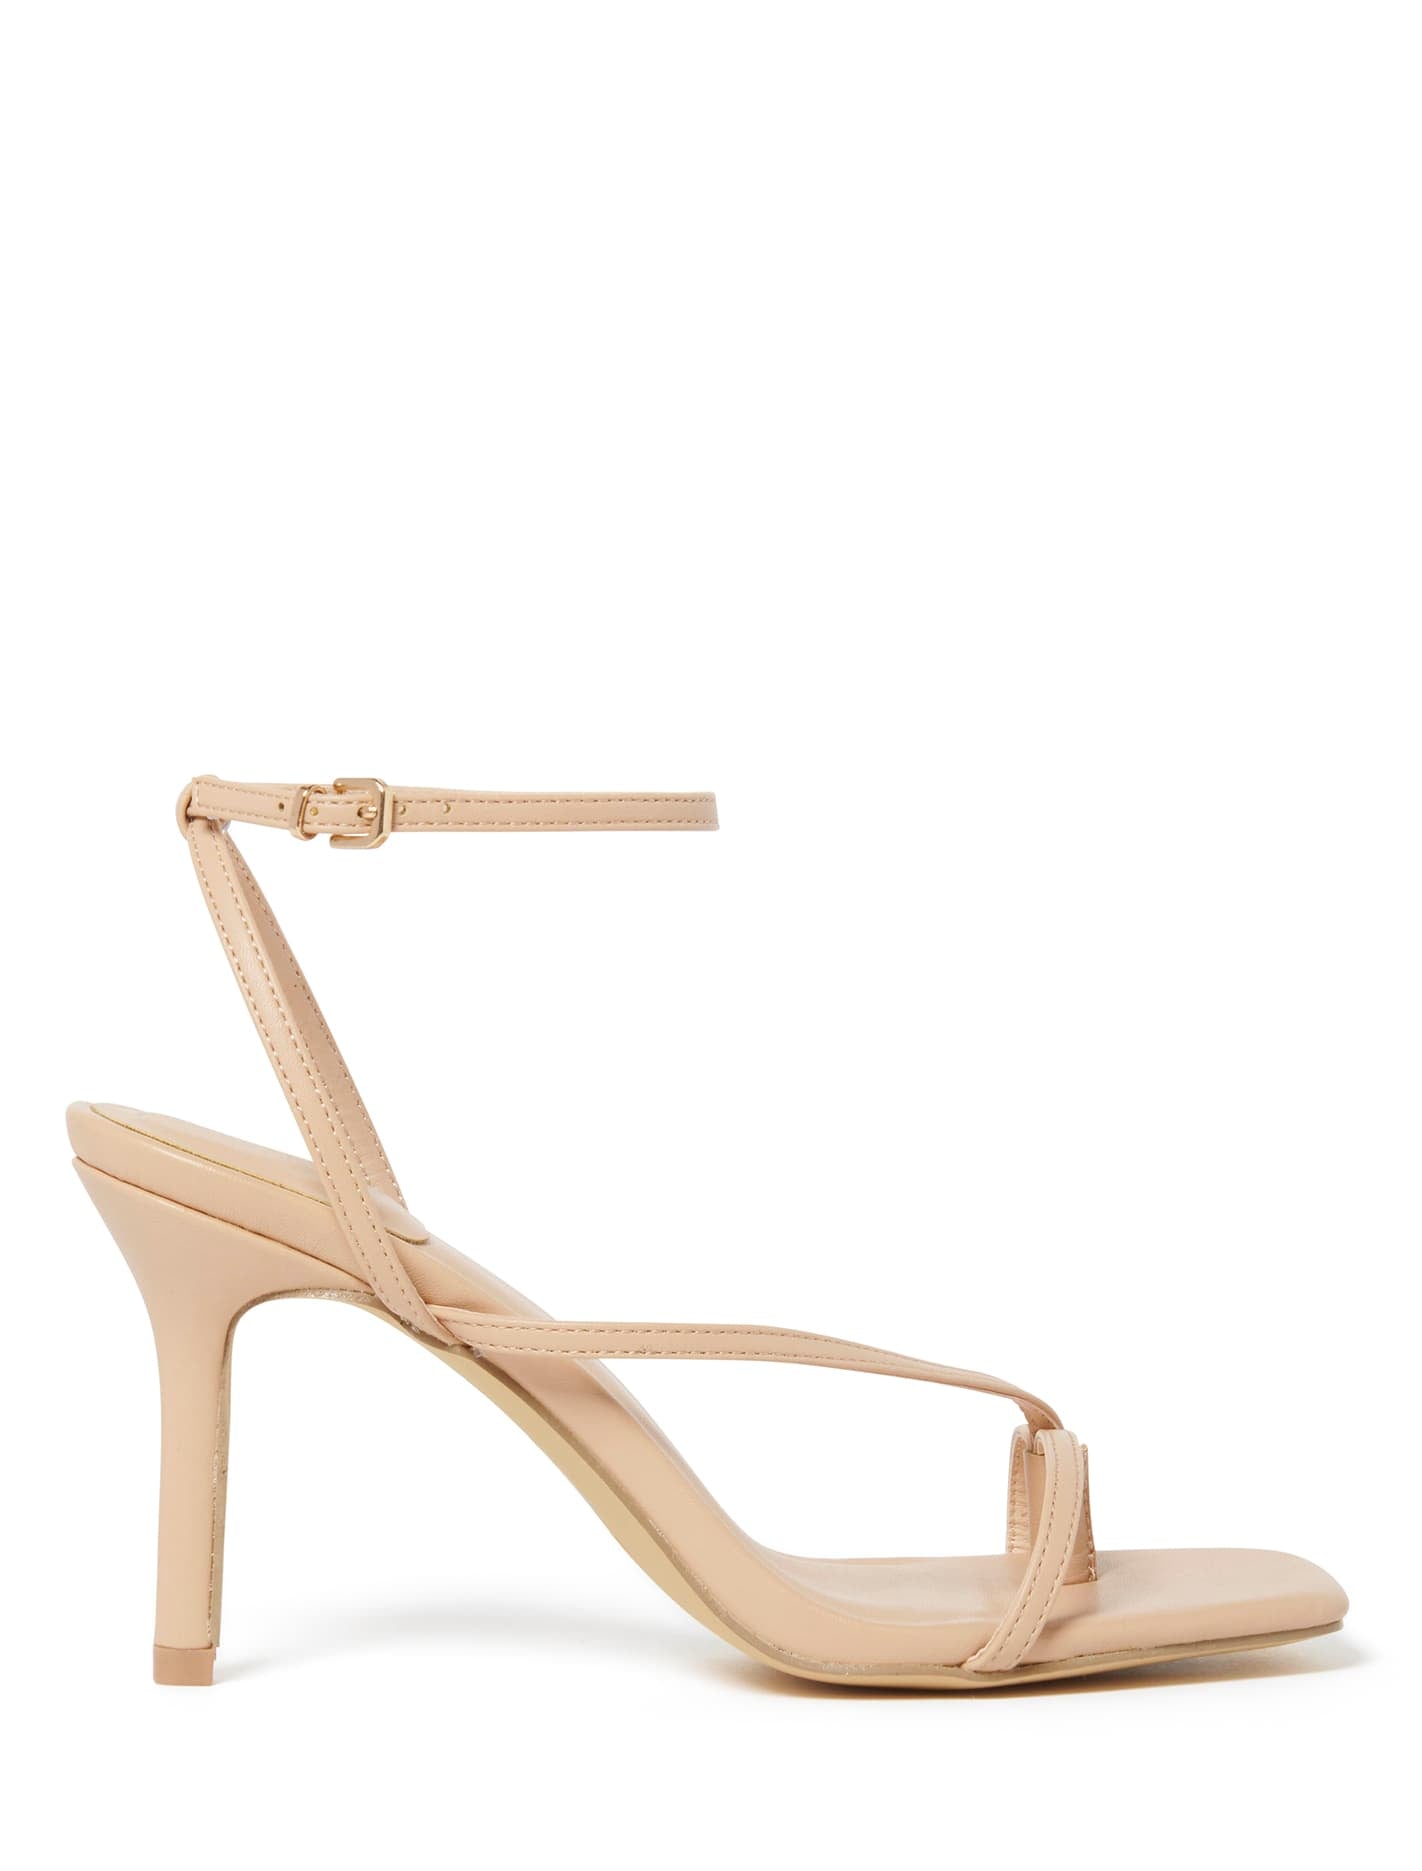 Forever New Shoes | Shop Heels, Sandals, Wedges & Flats Online – Page 2